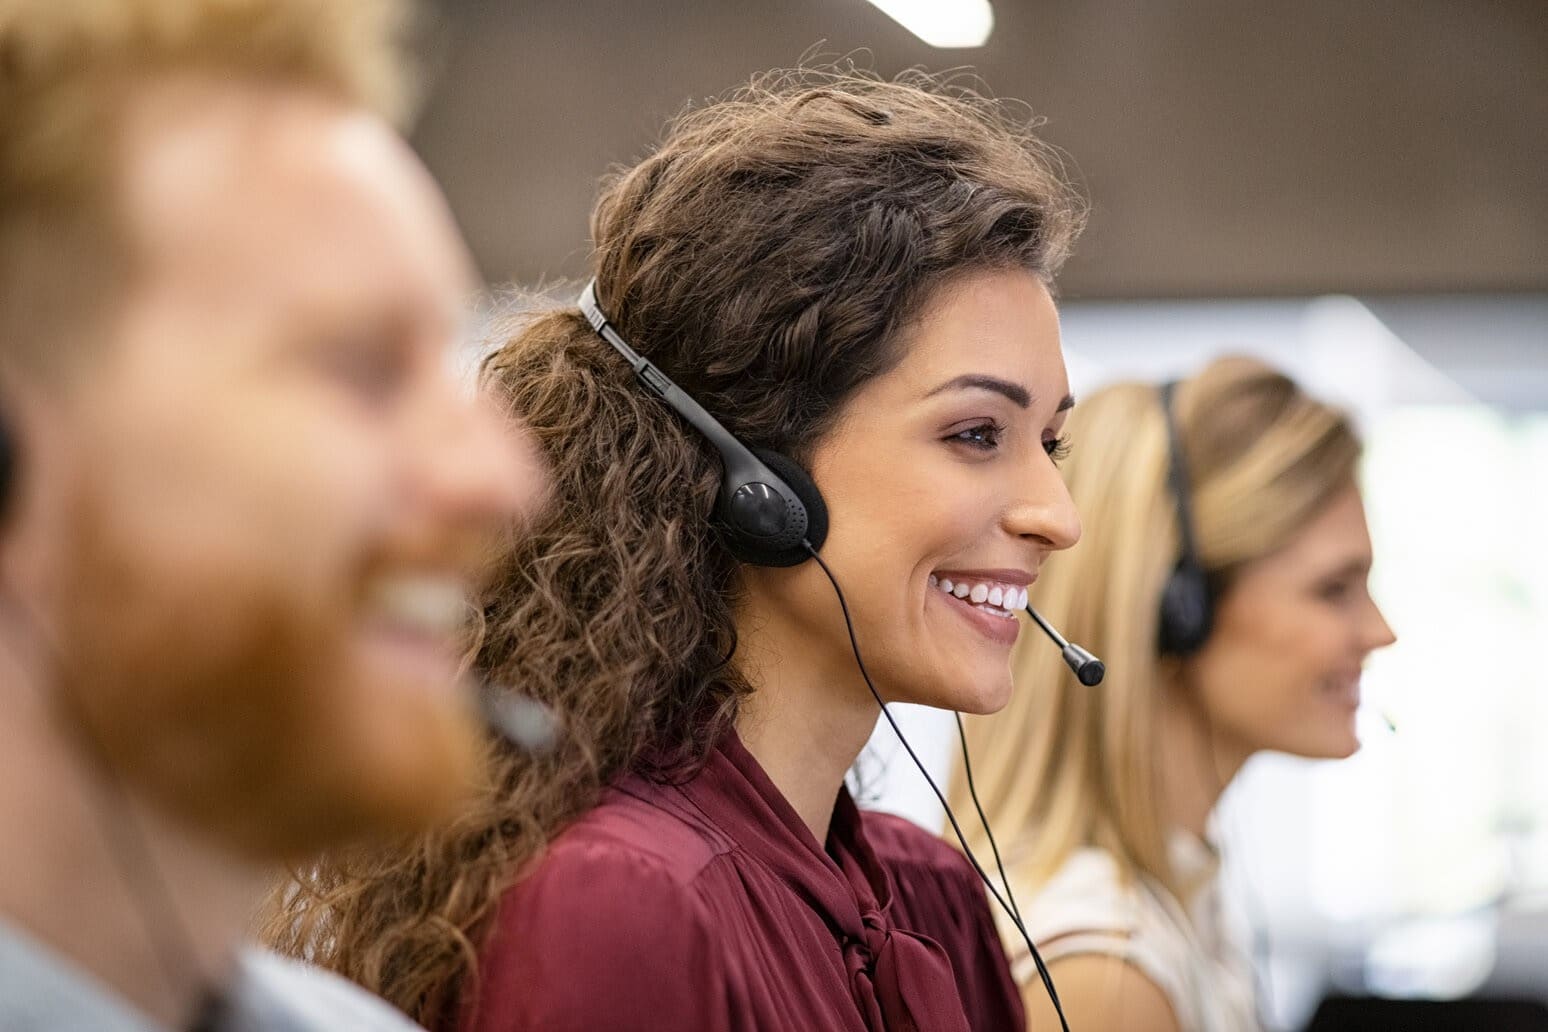 What exactly is a call center?